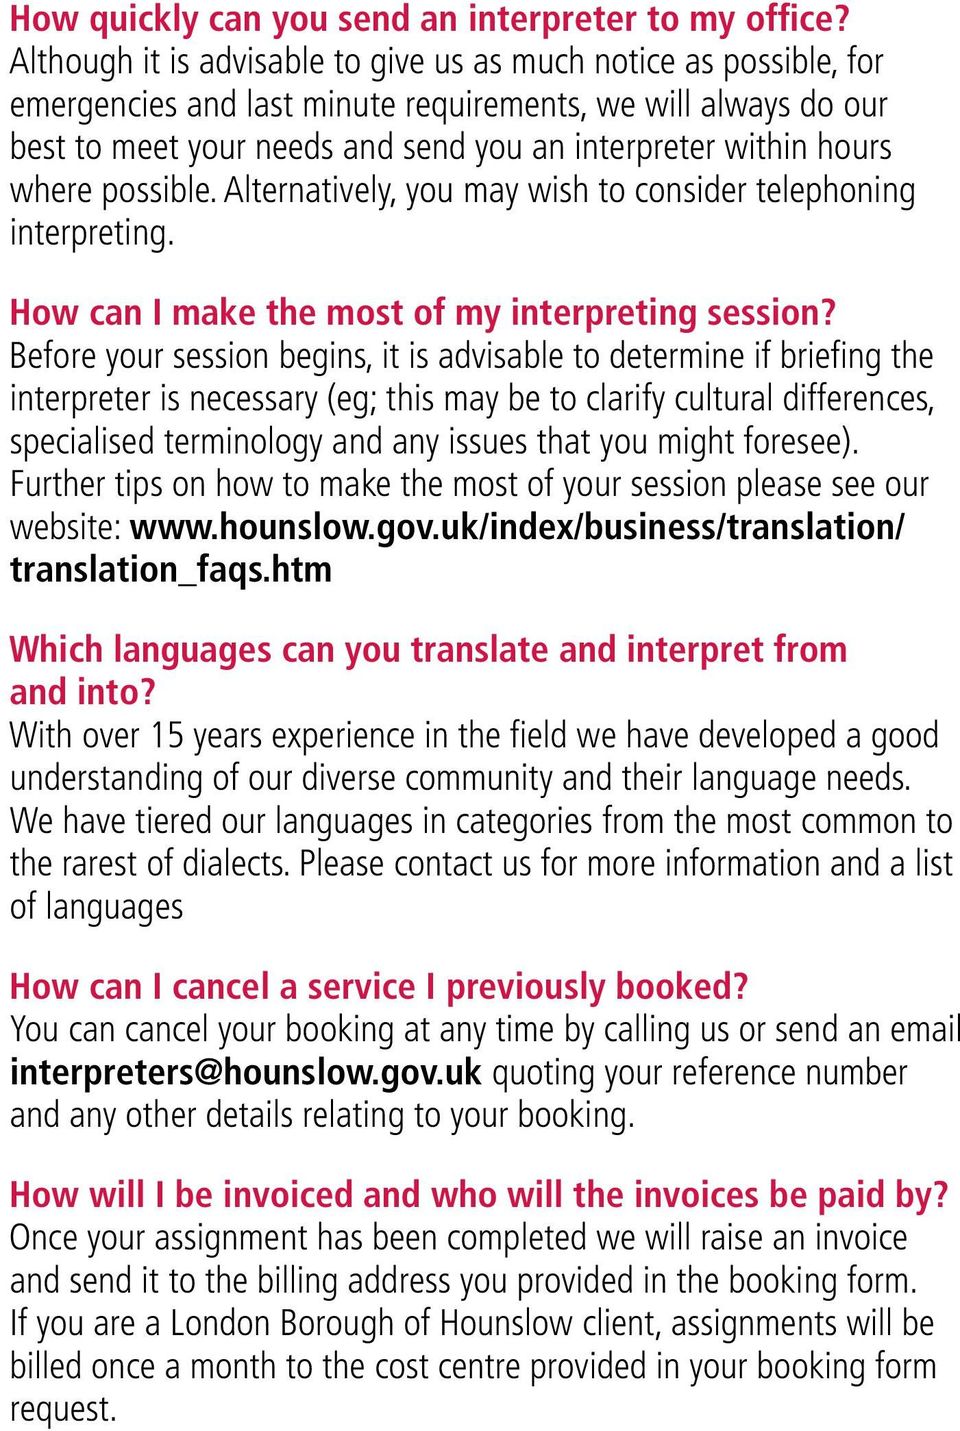 where possible. Alternatively, you may wish to consider telephoning interpreting. How can I make the most of my interpreting session?